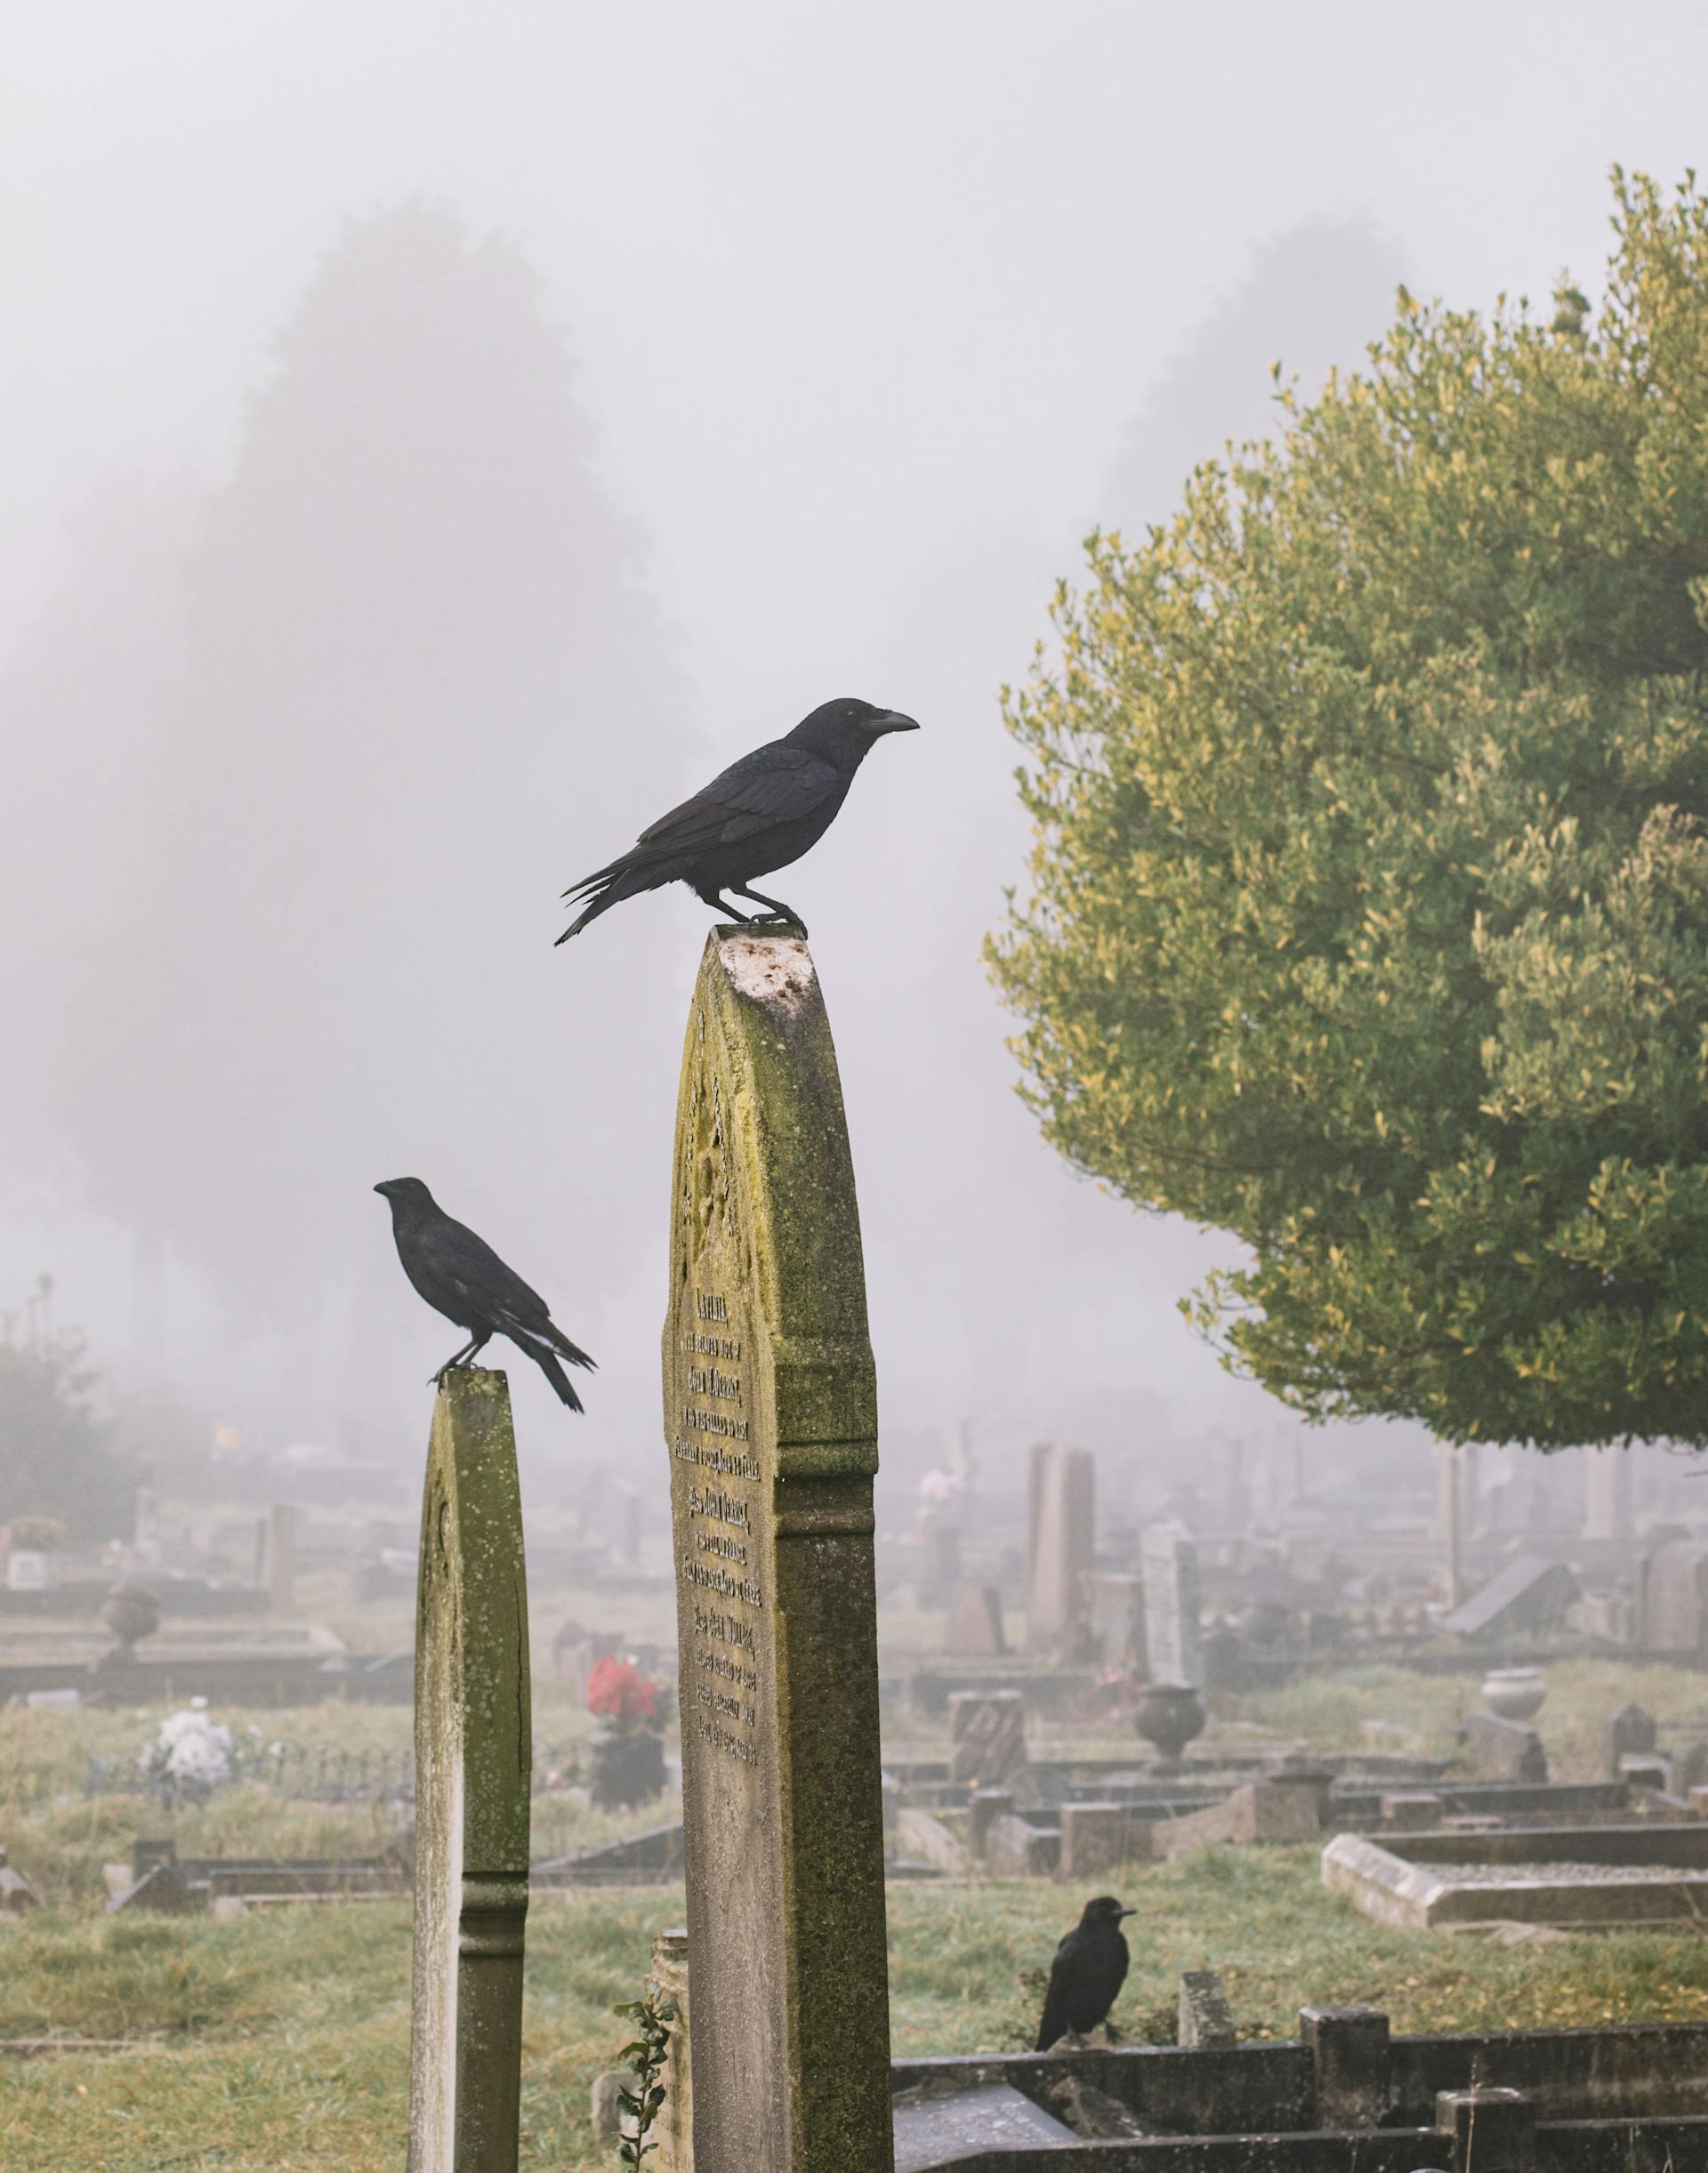 A cemetery | Source: Pexels